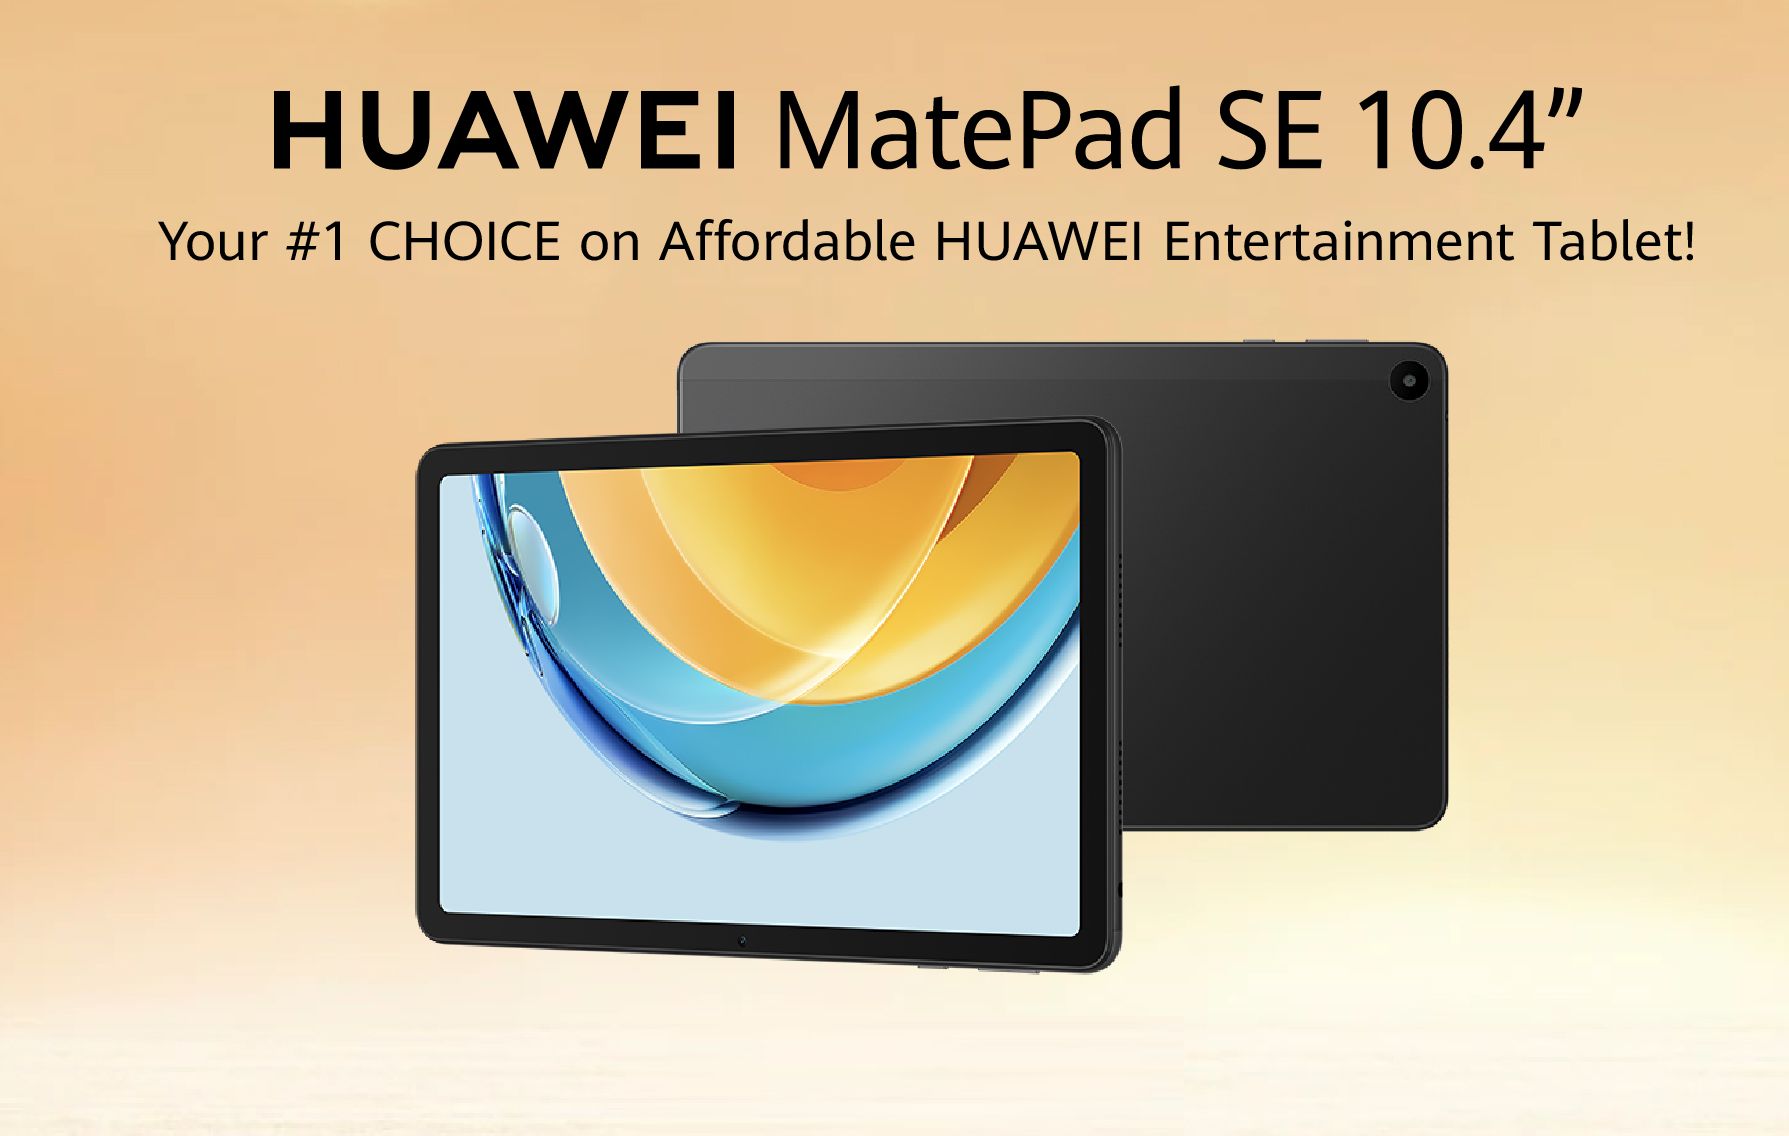 for Huawei SoyaCincau time tablet in rebate MatePad a 10.4 RM300 gets - Malaysia SE limited instant